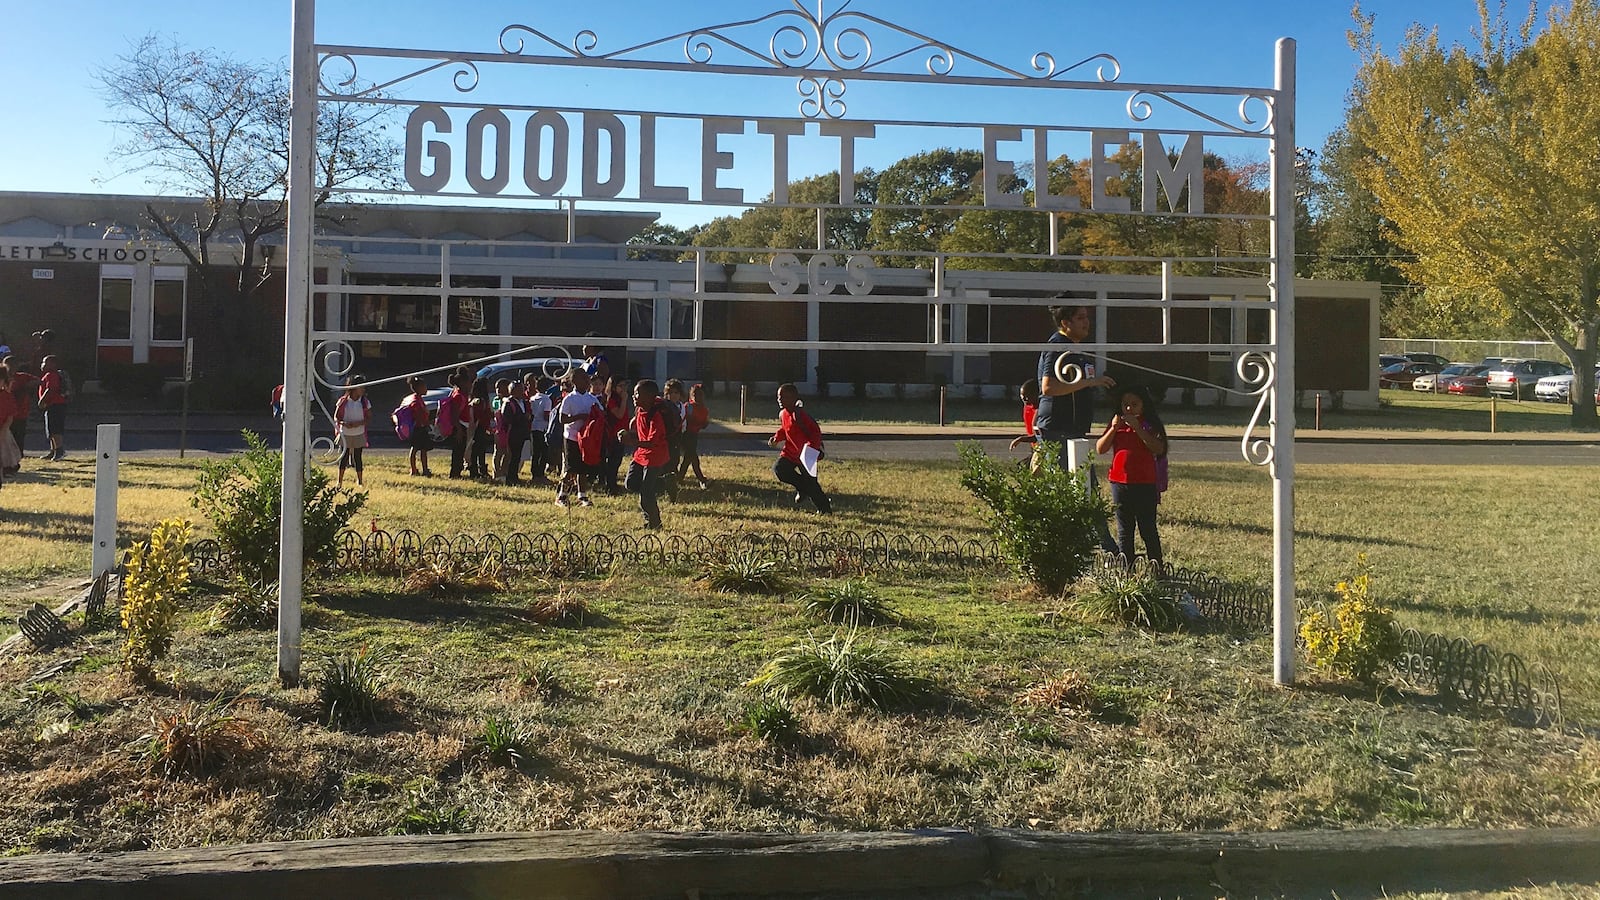 Goodlett Elementary is one of the schools being considered for a construction and consolidation project in Superintendent Dorsey Hopson's proposal unveiled this fall for Shelby County Schools.